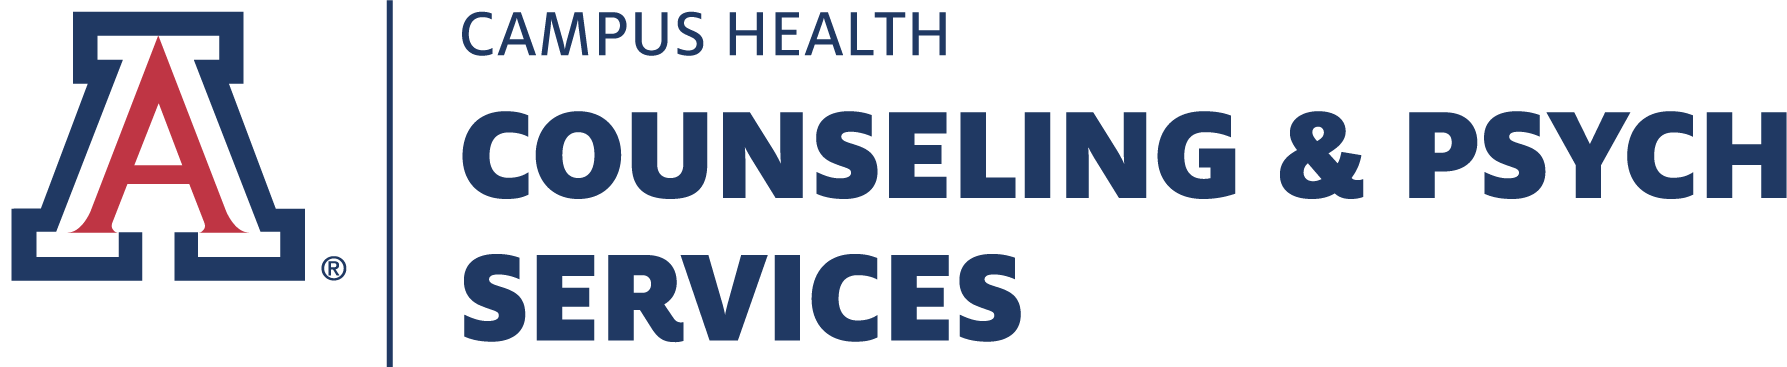 Counseling & Psych Services logo